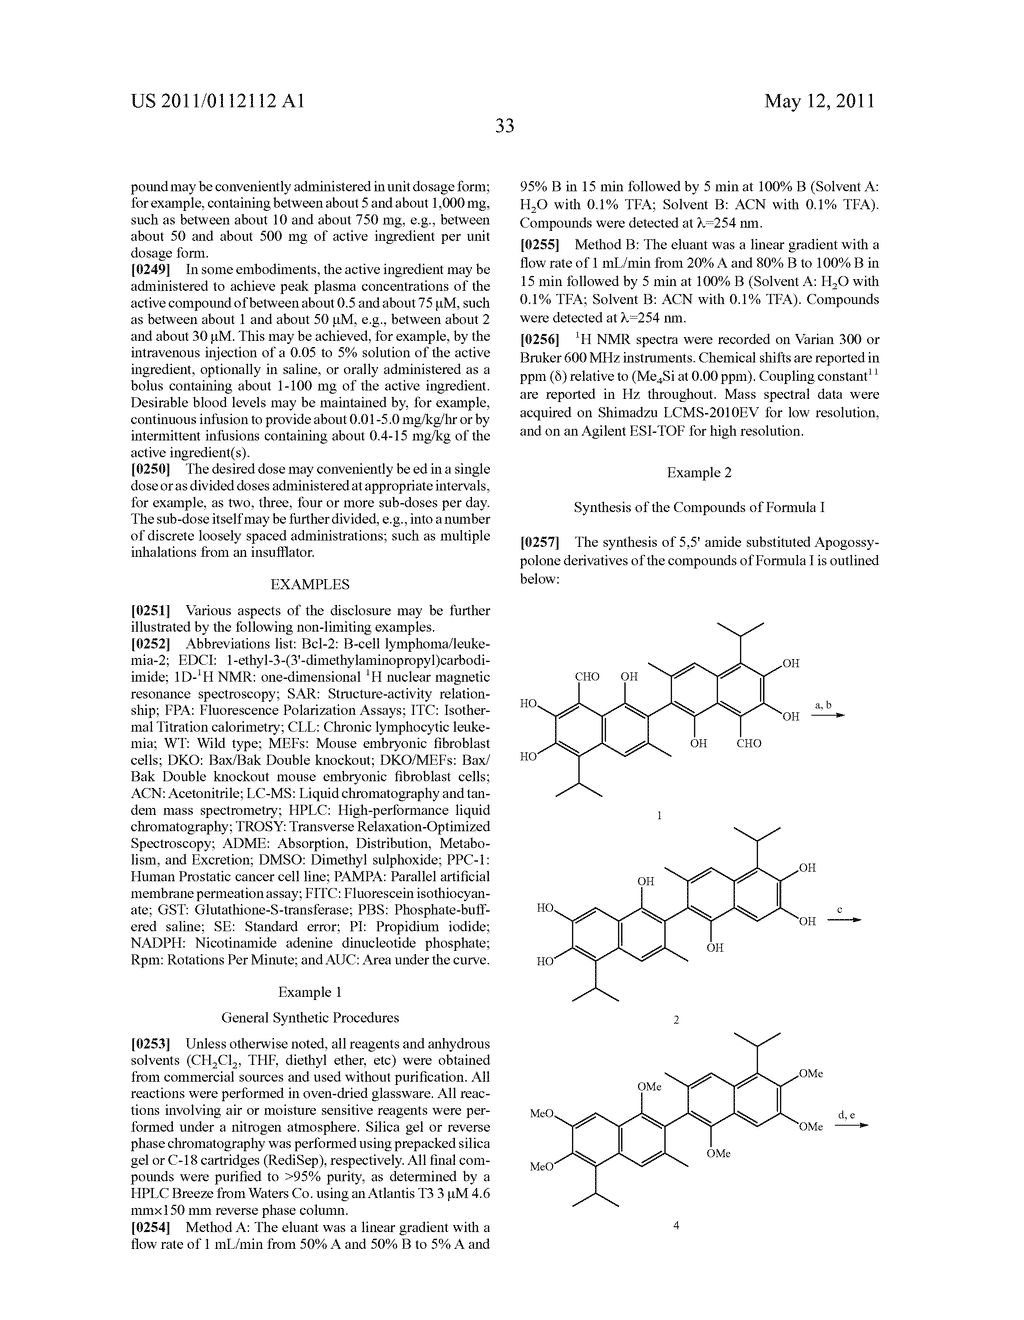 APOGOSSYPOLONE DERIVATIVES AS ANTICANCER AGENTS - diagram, schematic, and image 59